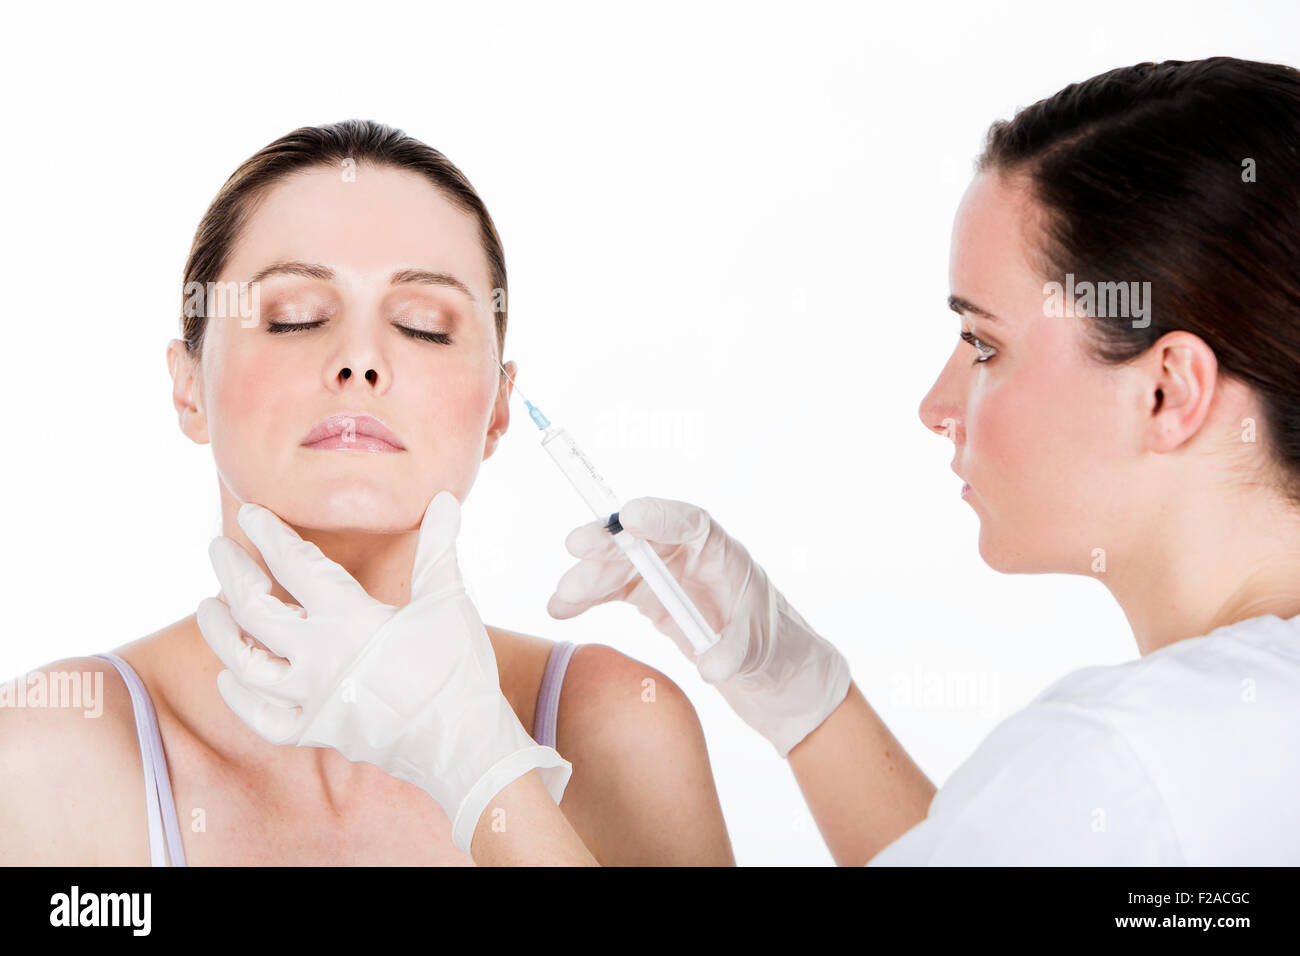 doctor gets botox injection to a woman patient Stock Photo